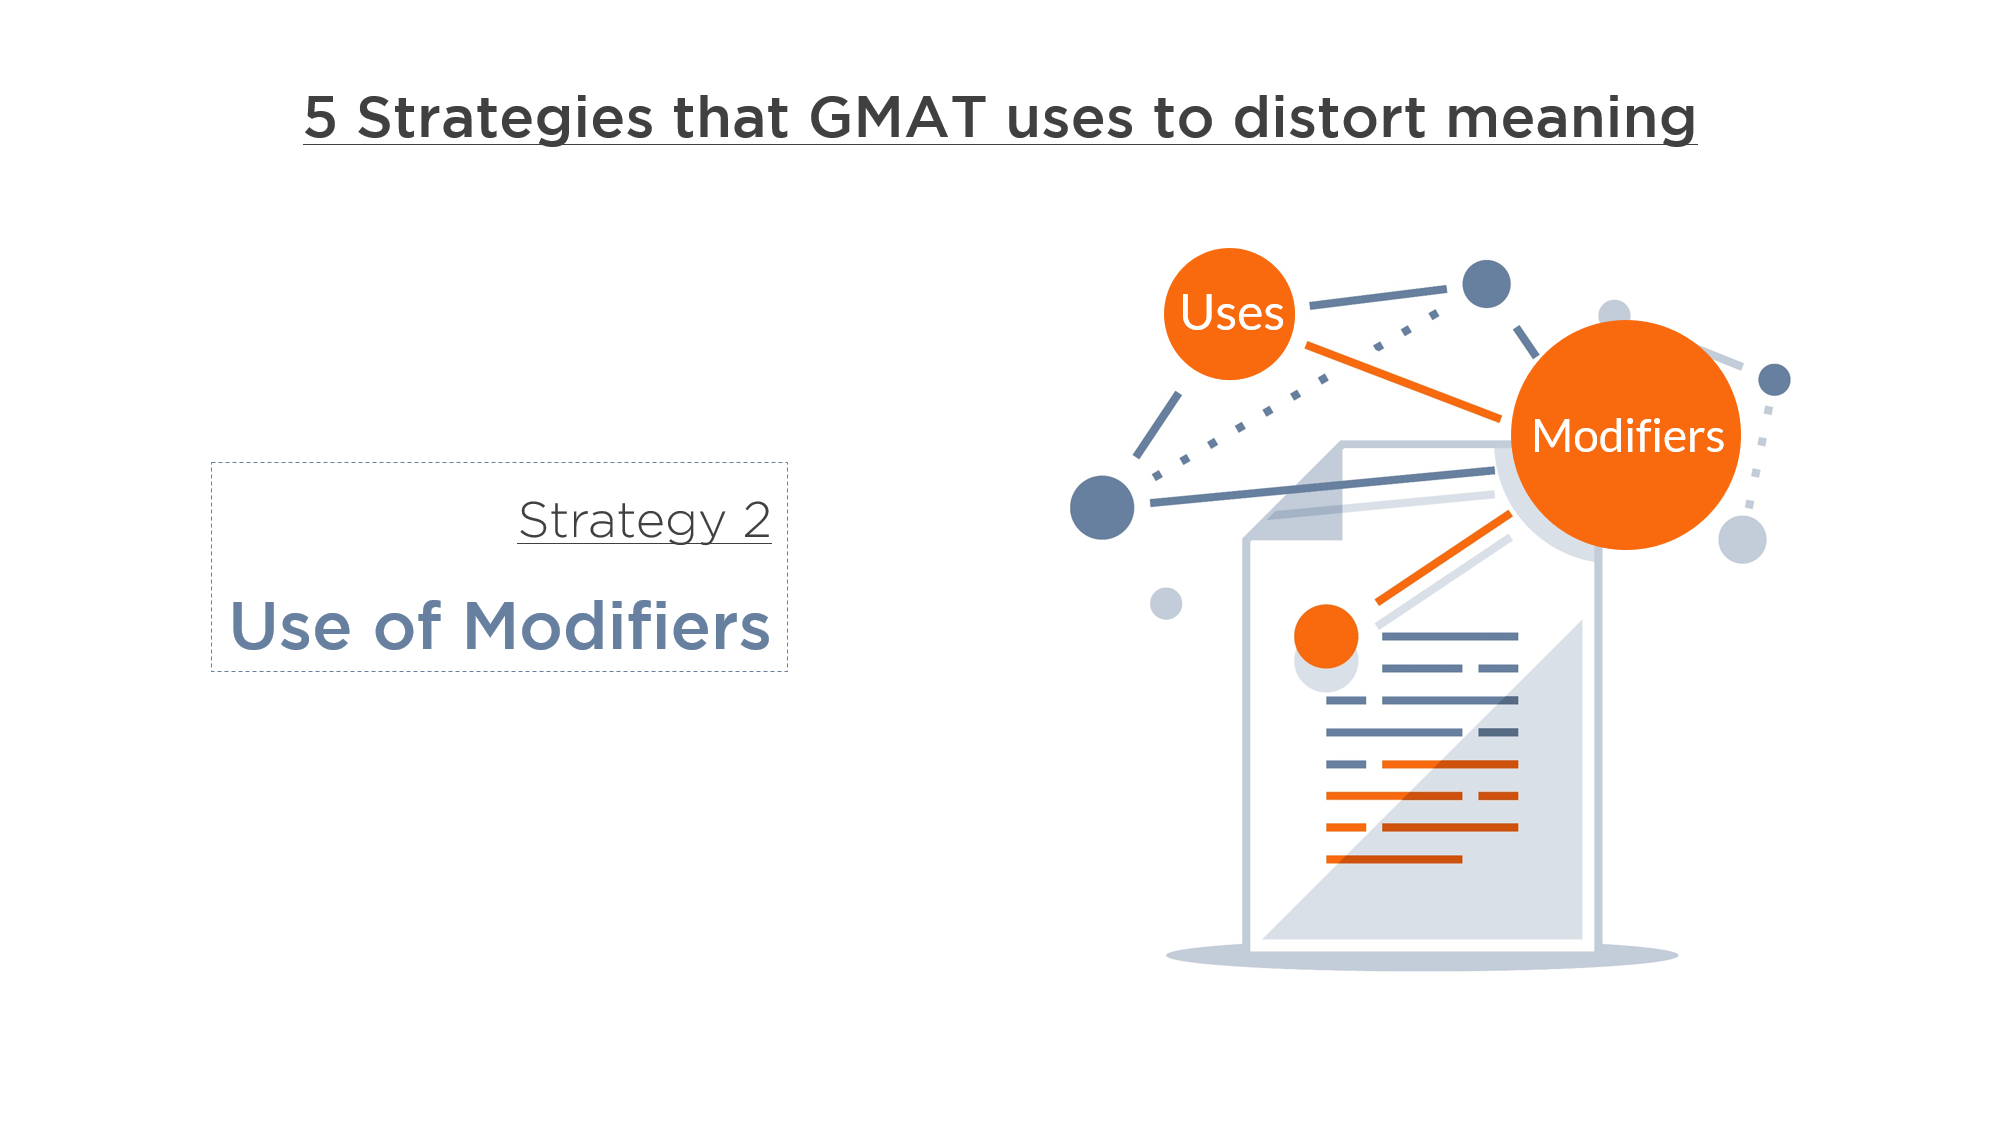 Strategy 2 – Use of Modifiers - GMAT Meaning